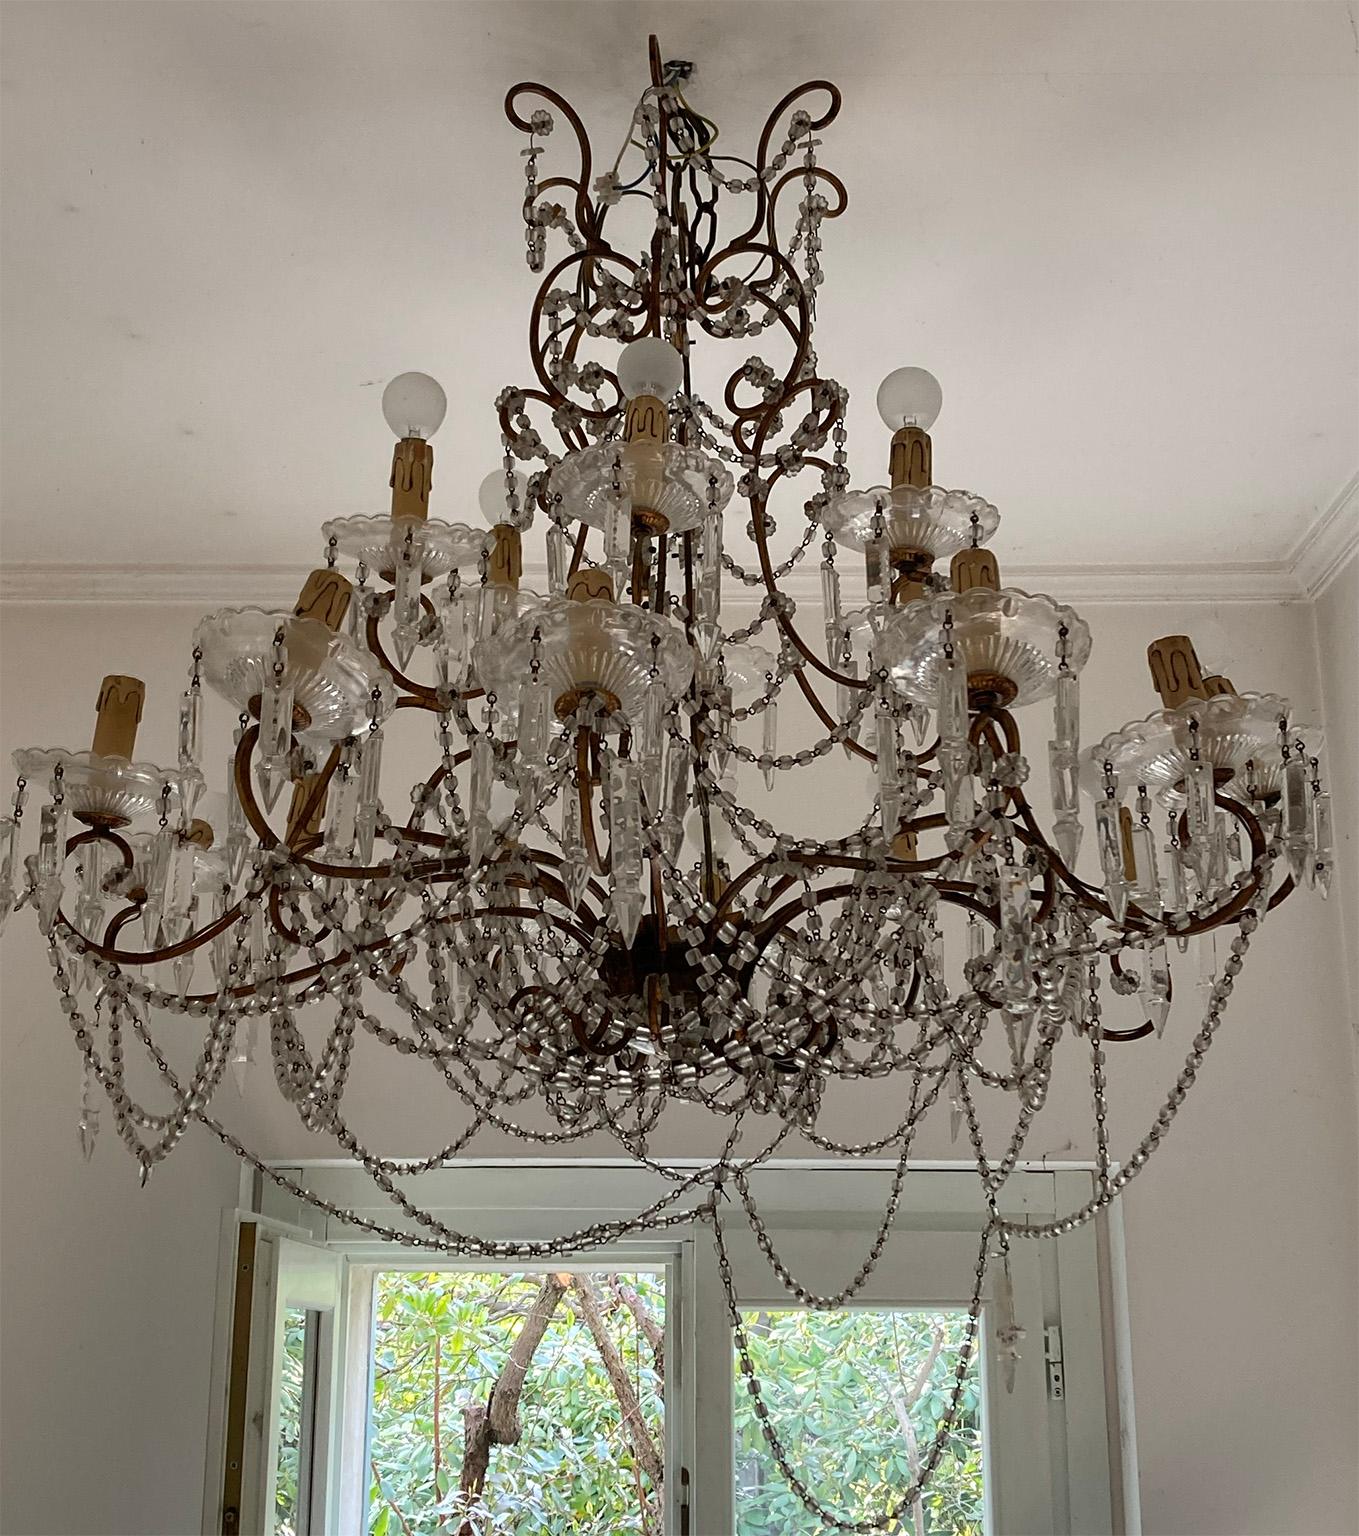 Elegant nineteenth century Sicilian chandelier in gilded metal and crystal.
Provenance: Dimora in Palermo
18 lights arranged in two orders. 
Measures: 85 x 85 cm 
33,46 x 33,46 inches.
    